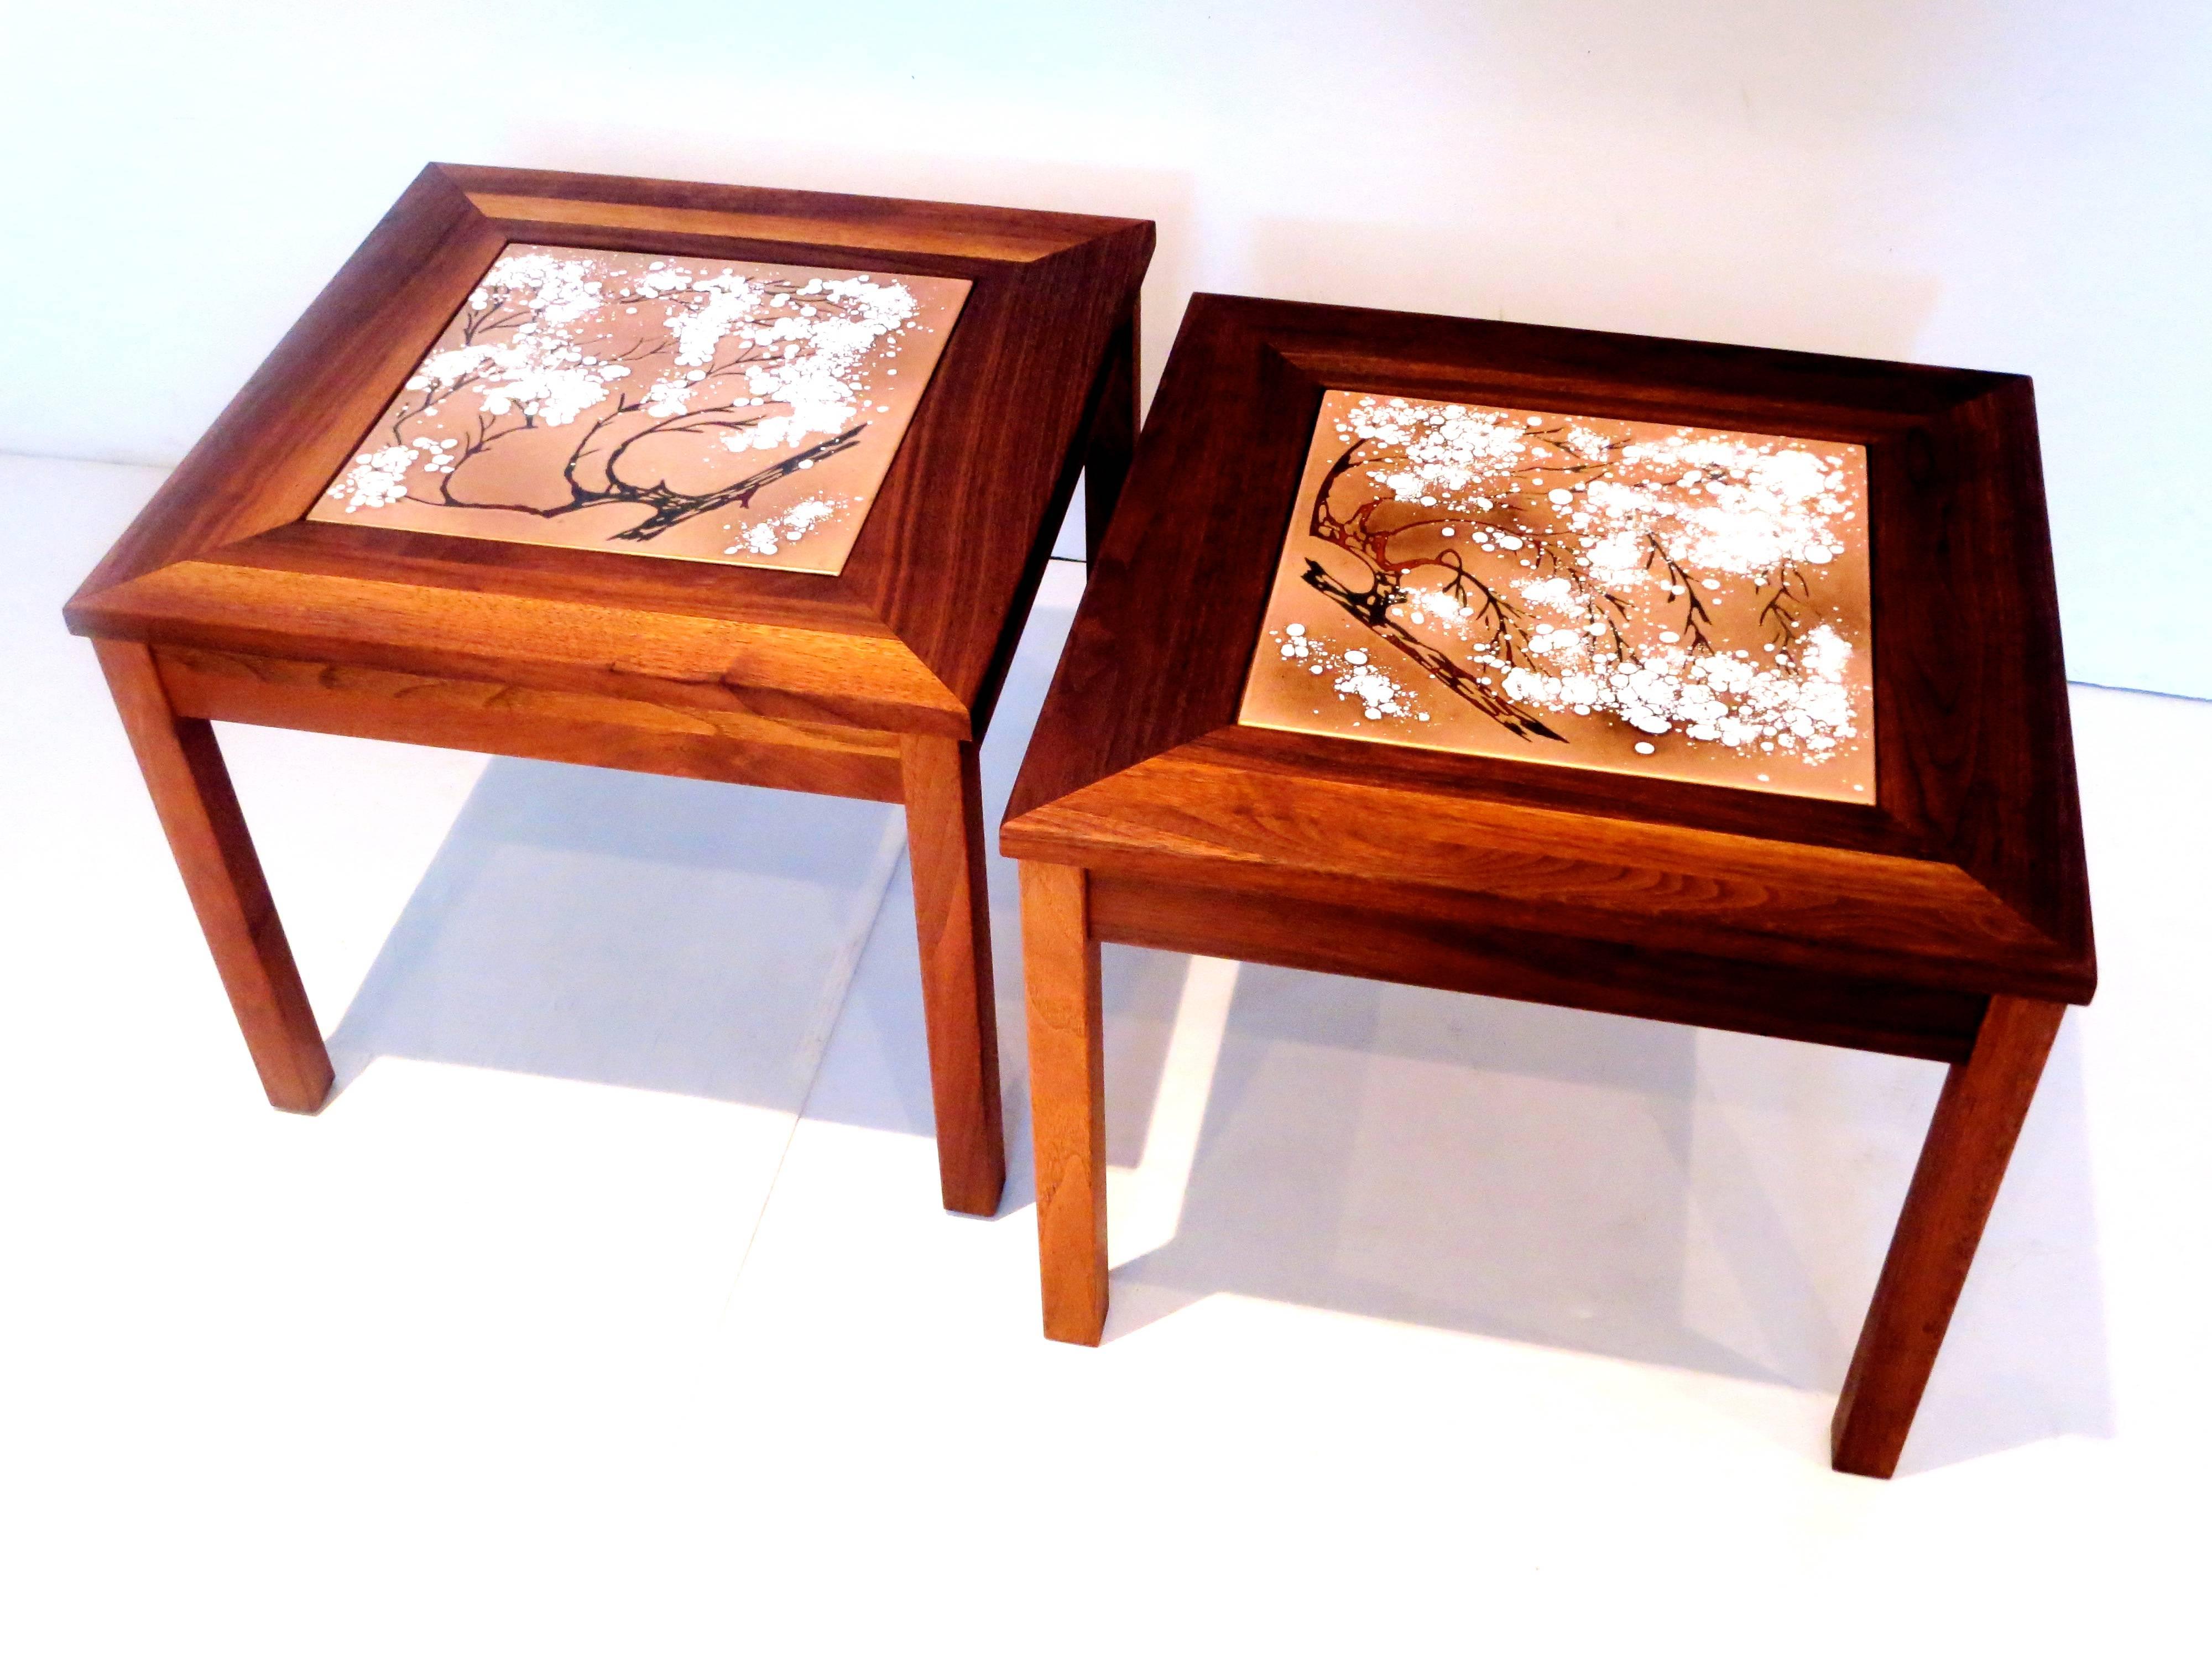 Nice and unique set of solid walnut frames with copper and enameled centers, beautiful design, the tables have been refinished and they are solid and sturdy, hand rubbed walnut oil finish.